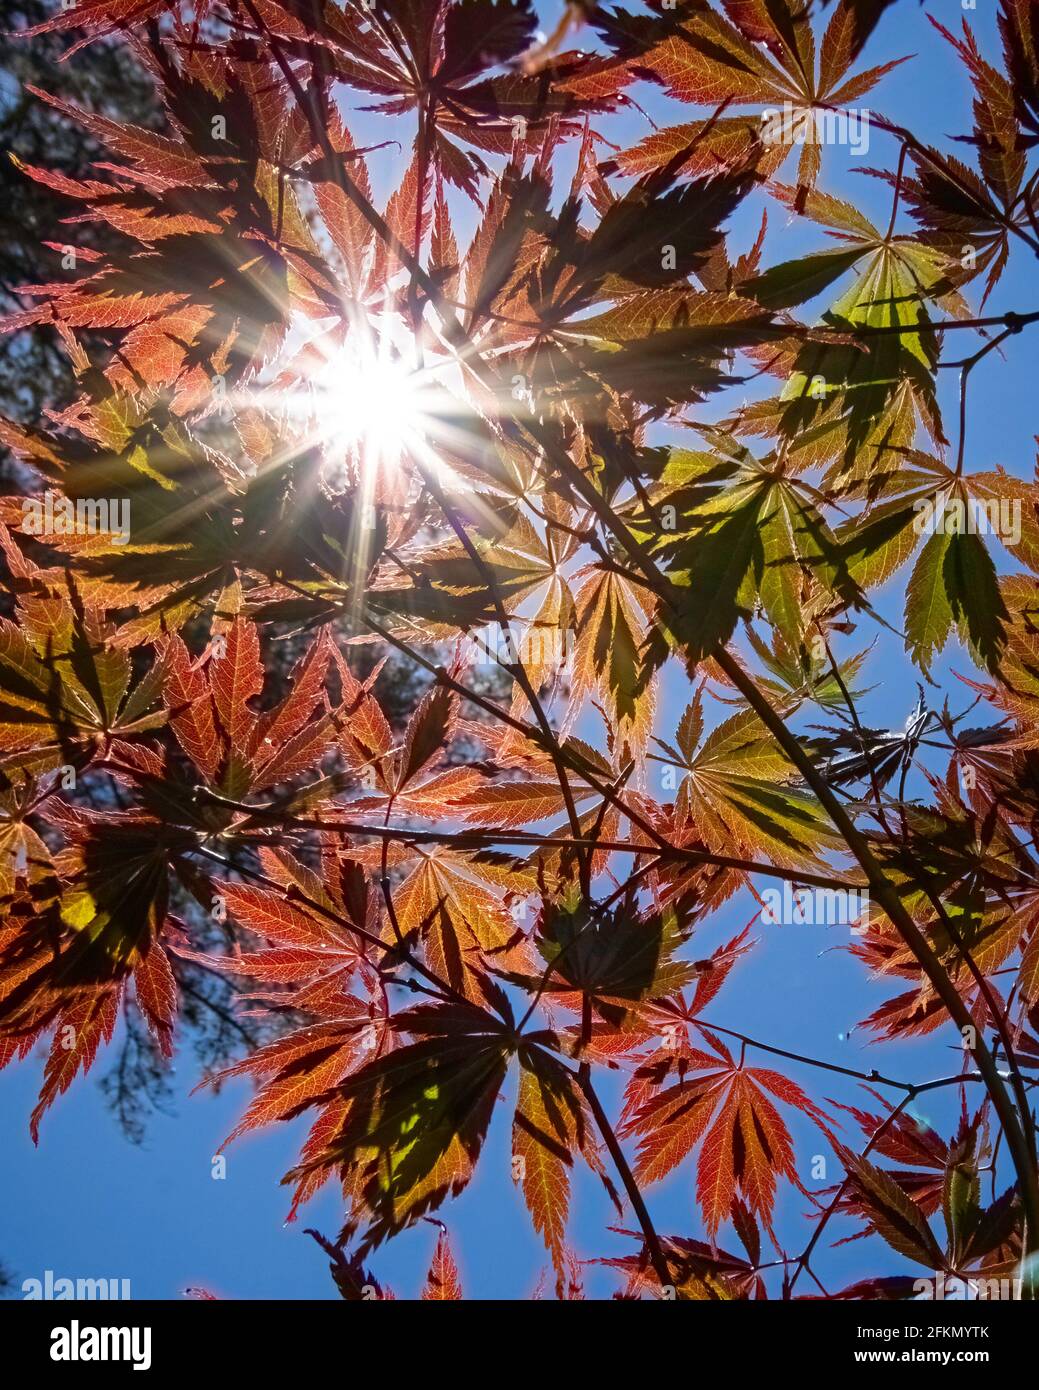 Natural background of Japanese maple (Acer palmatum) leaves shot from below with a sunburst in the upper left. Stock Photo